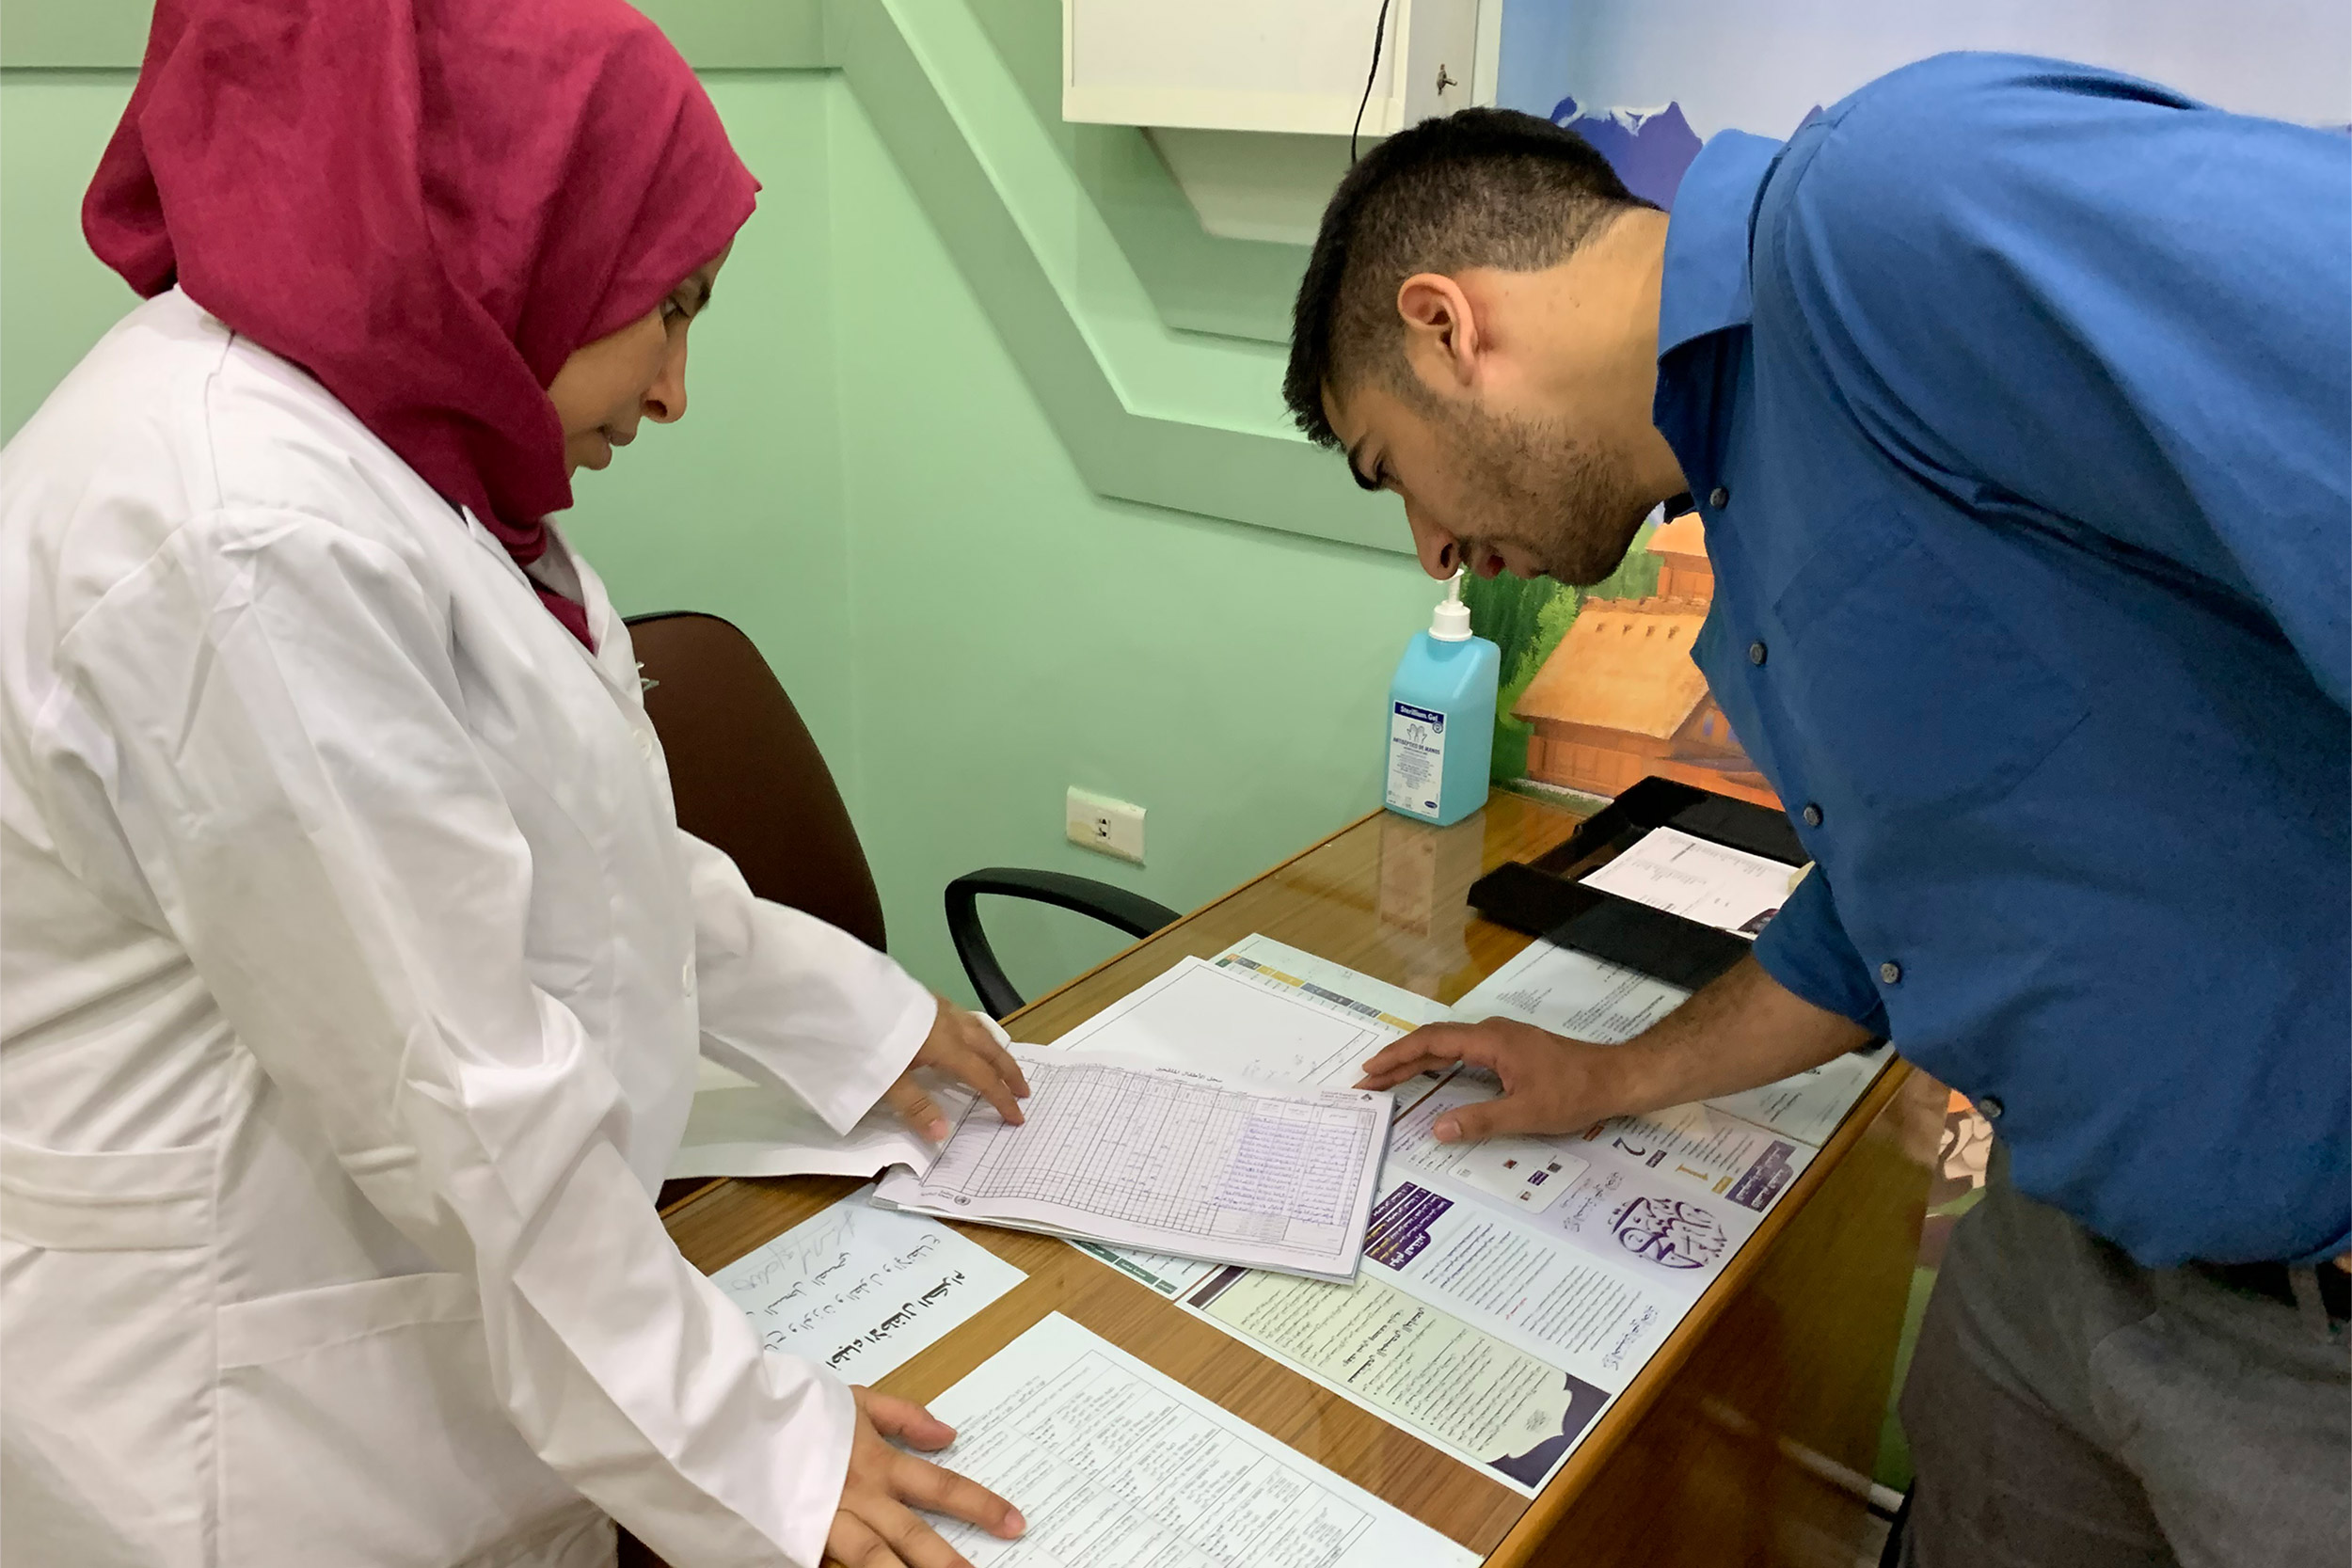 Inspecting medical documents in Tripoli.